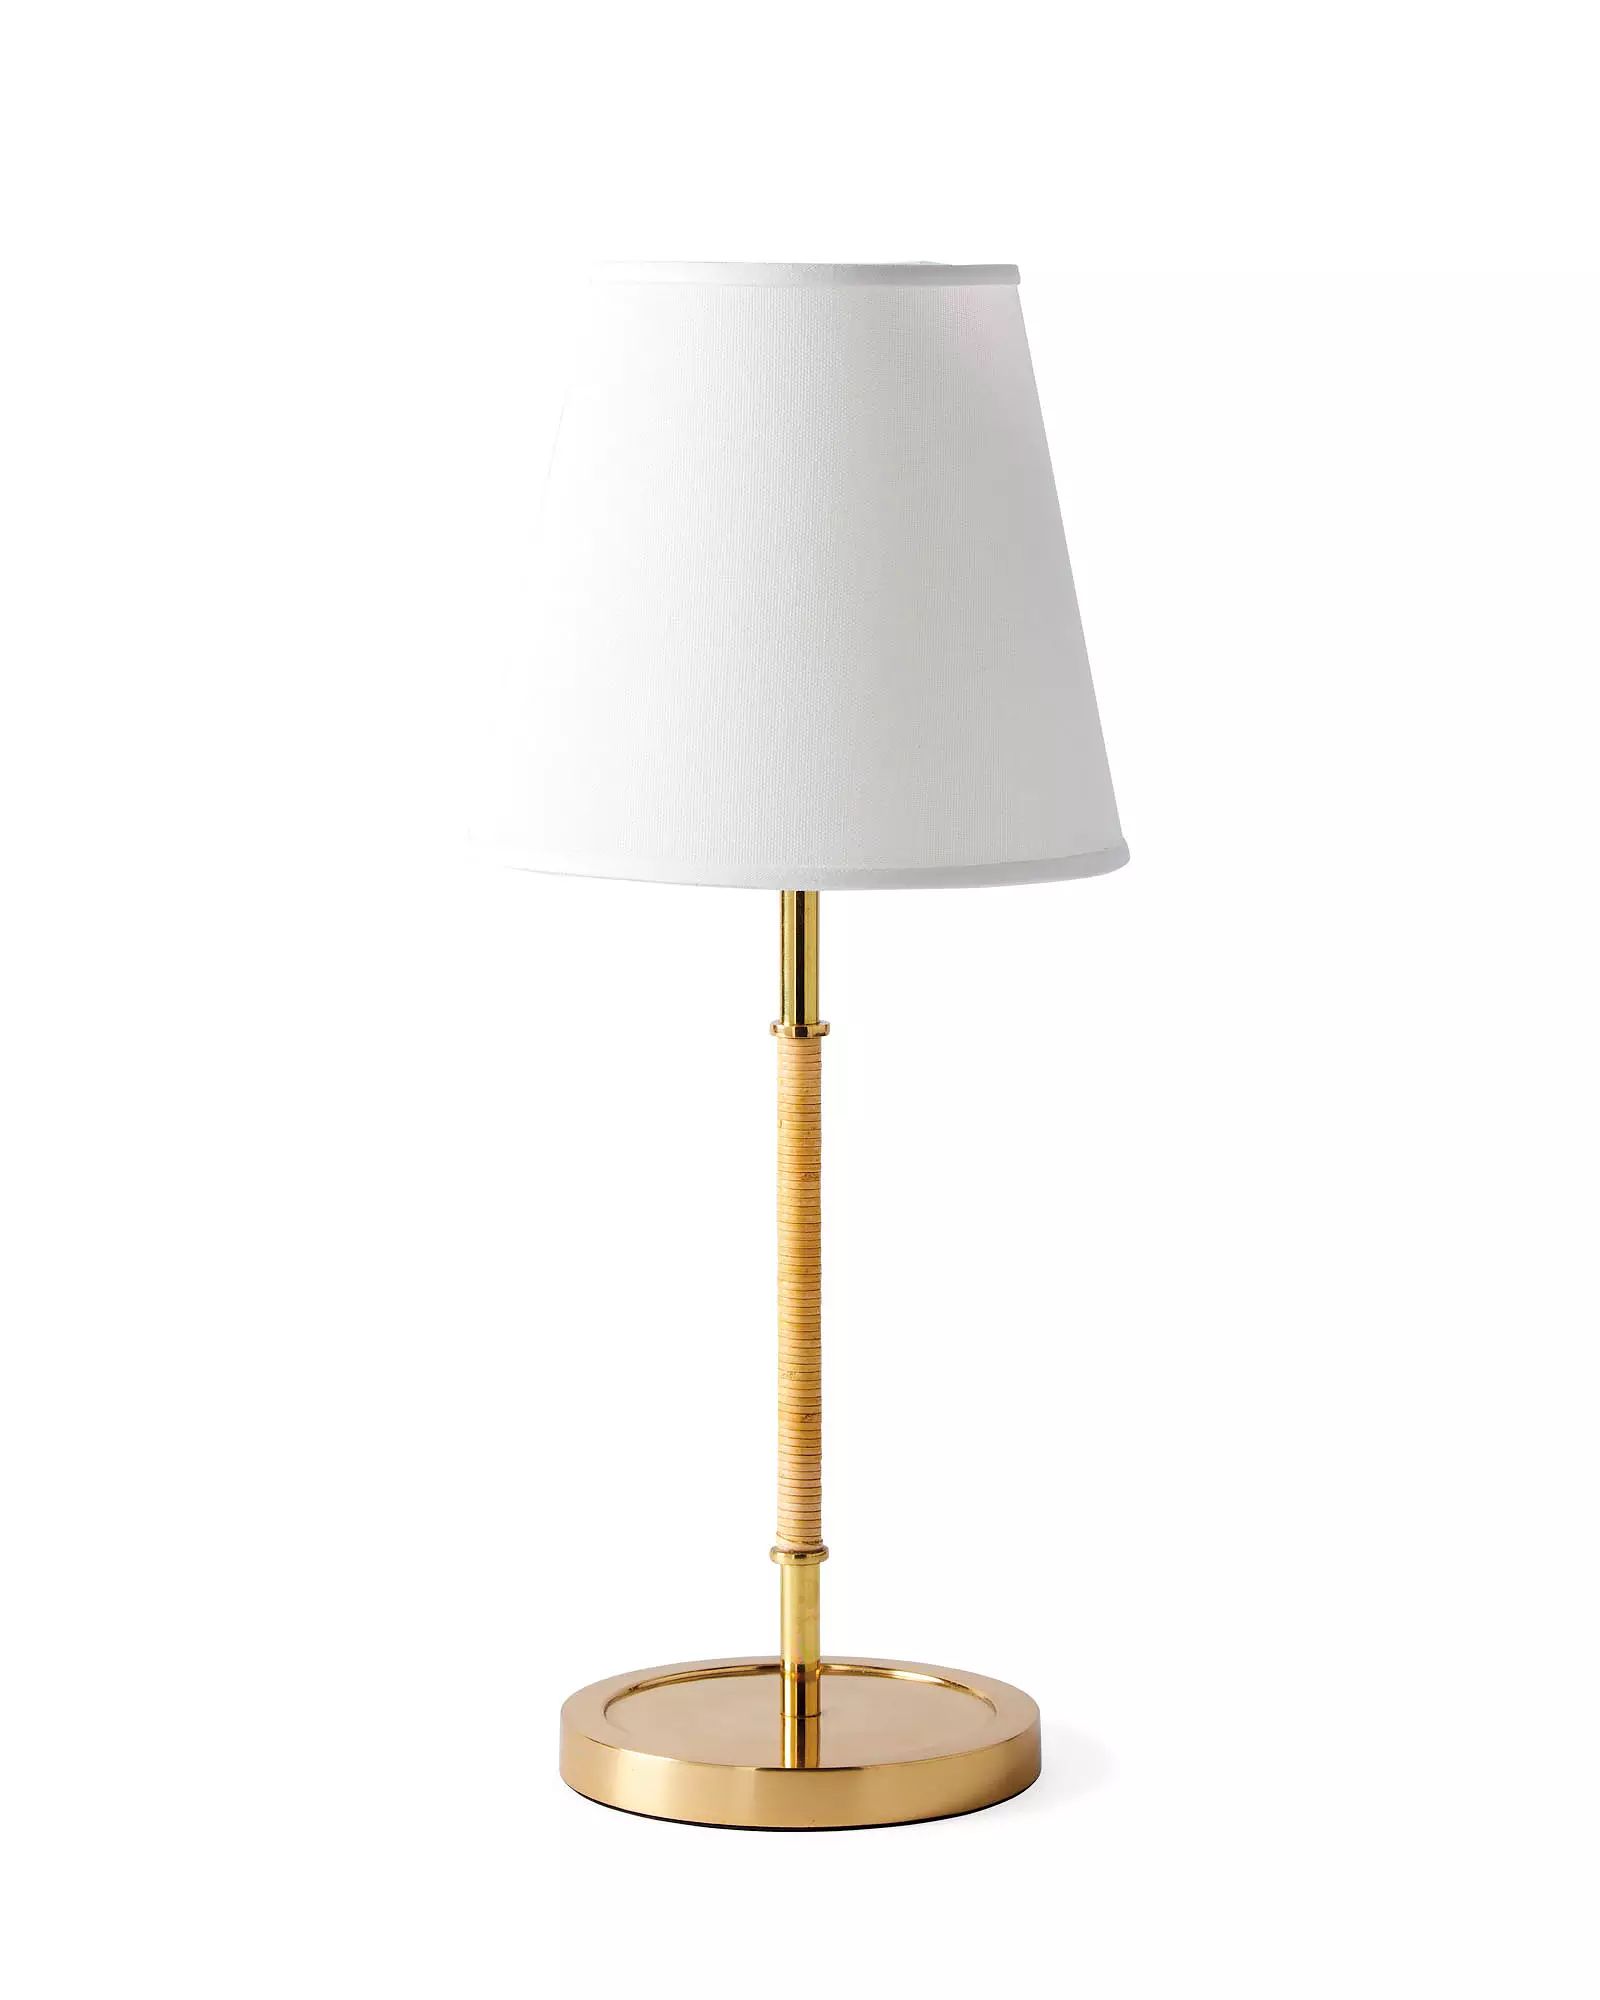 Larkspur Petite Table Lamp | Serena and Lily